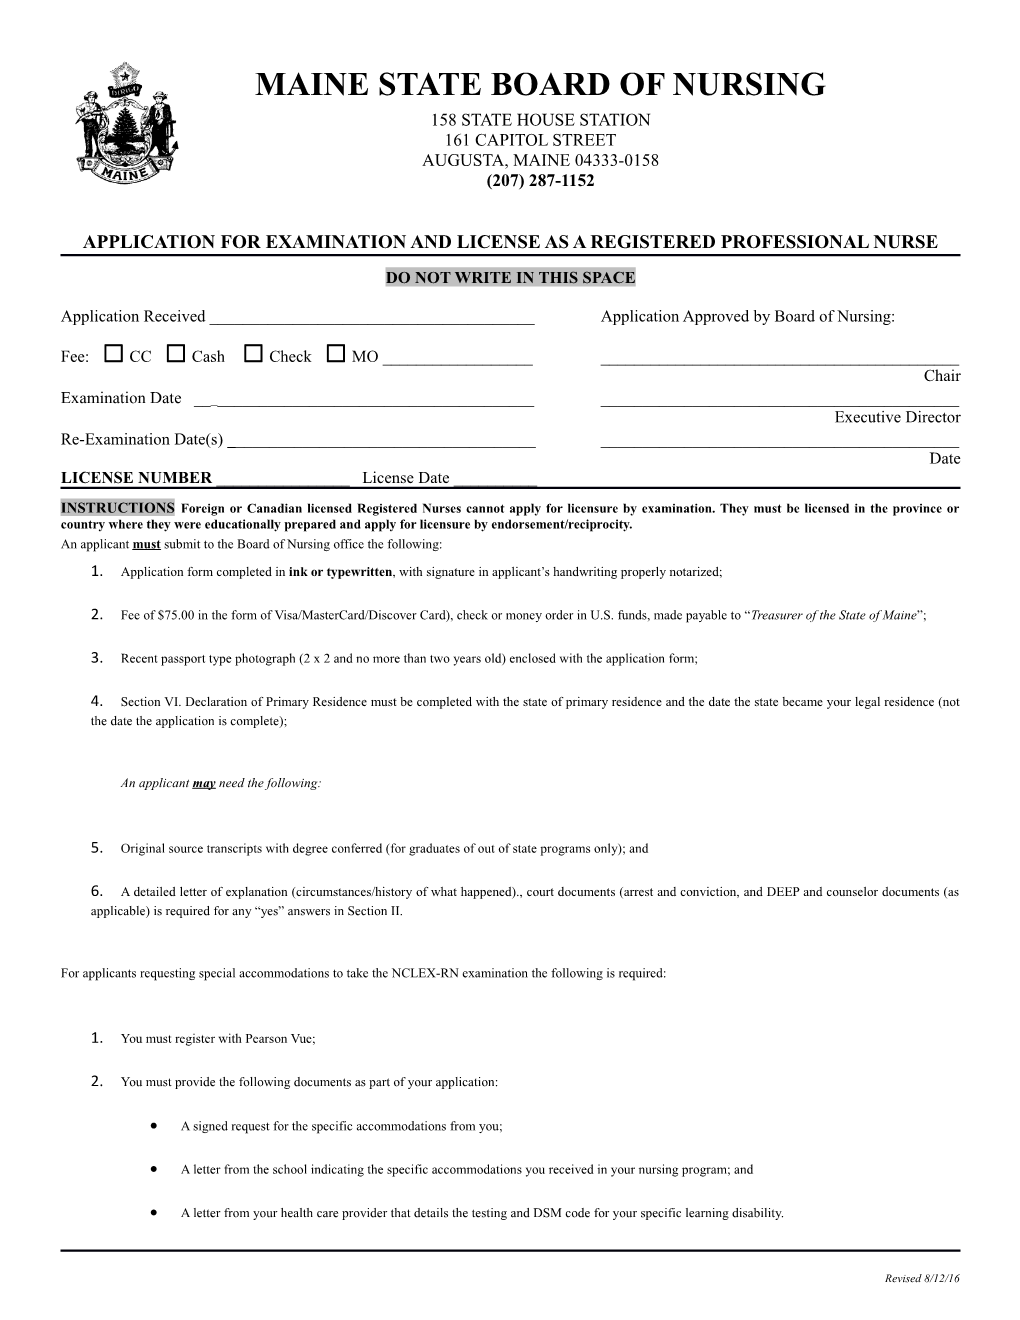 Application for Examination and License As a Registered Professional Nurse